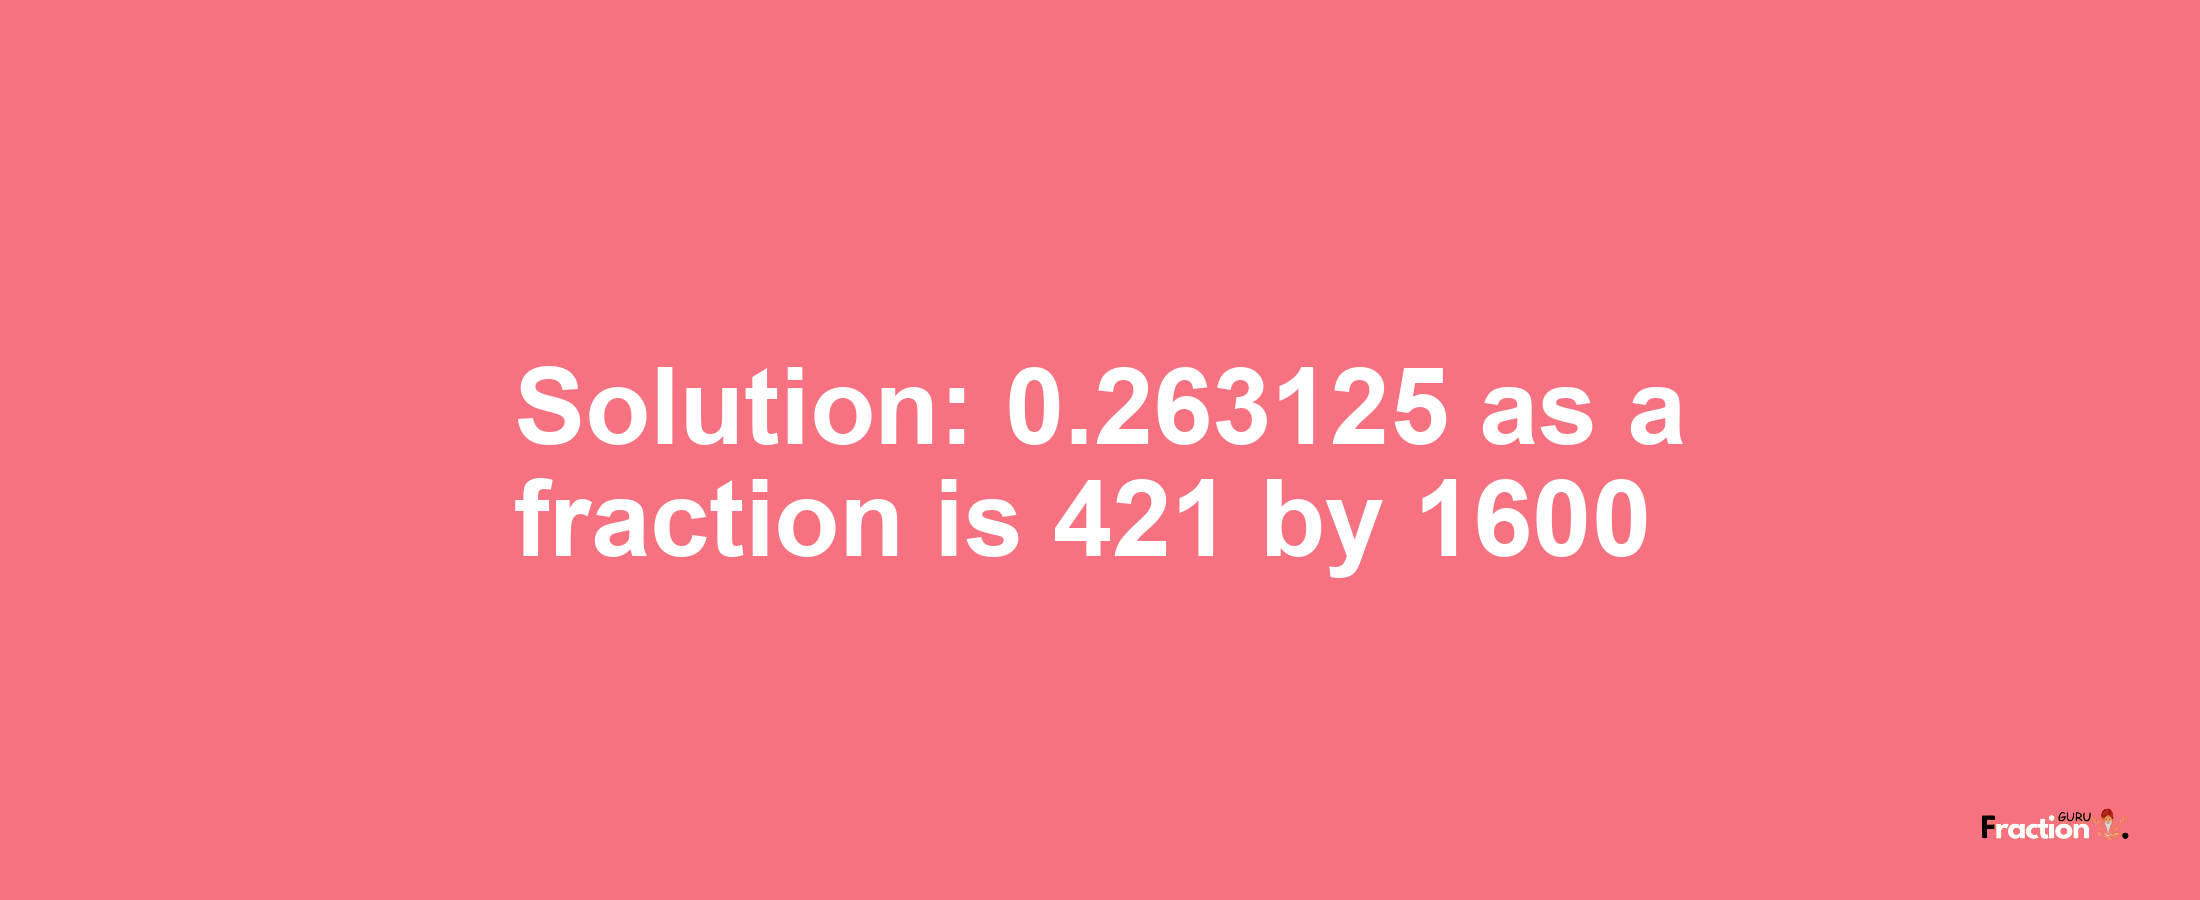 Solution:0.263125 as a fraction is 421/1600